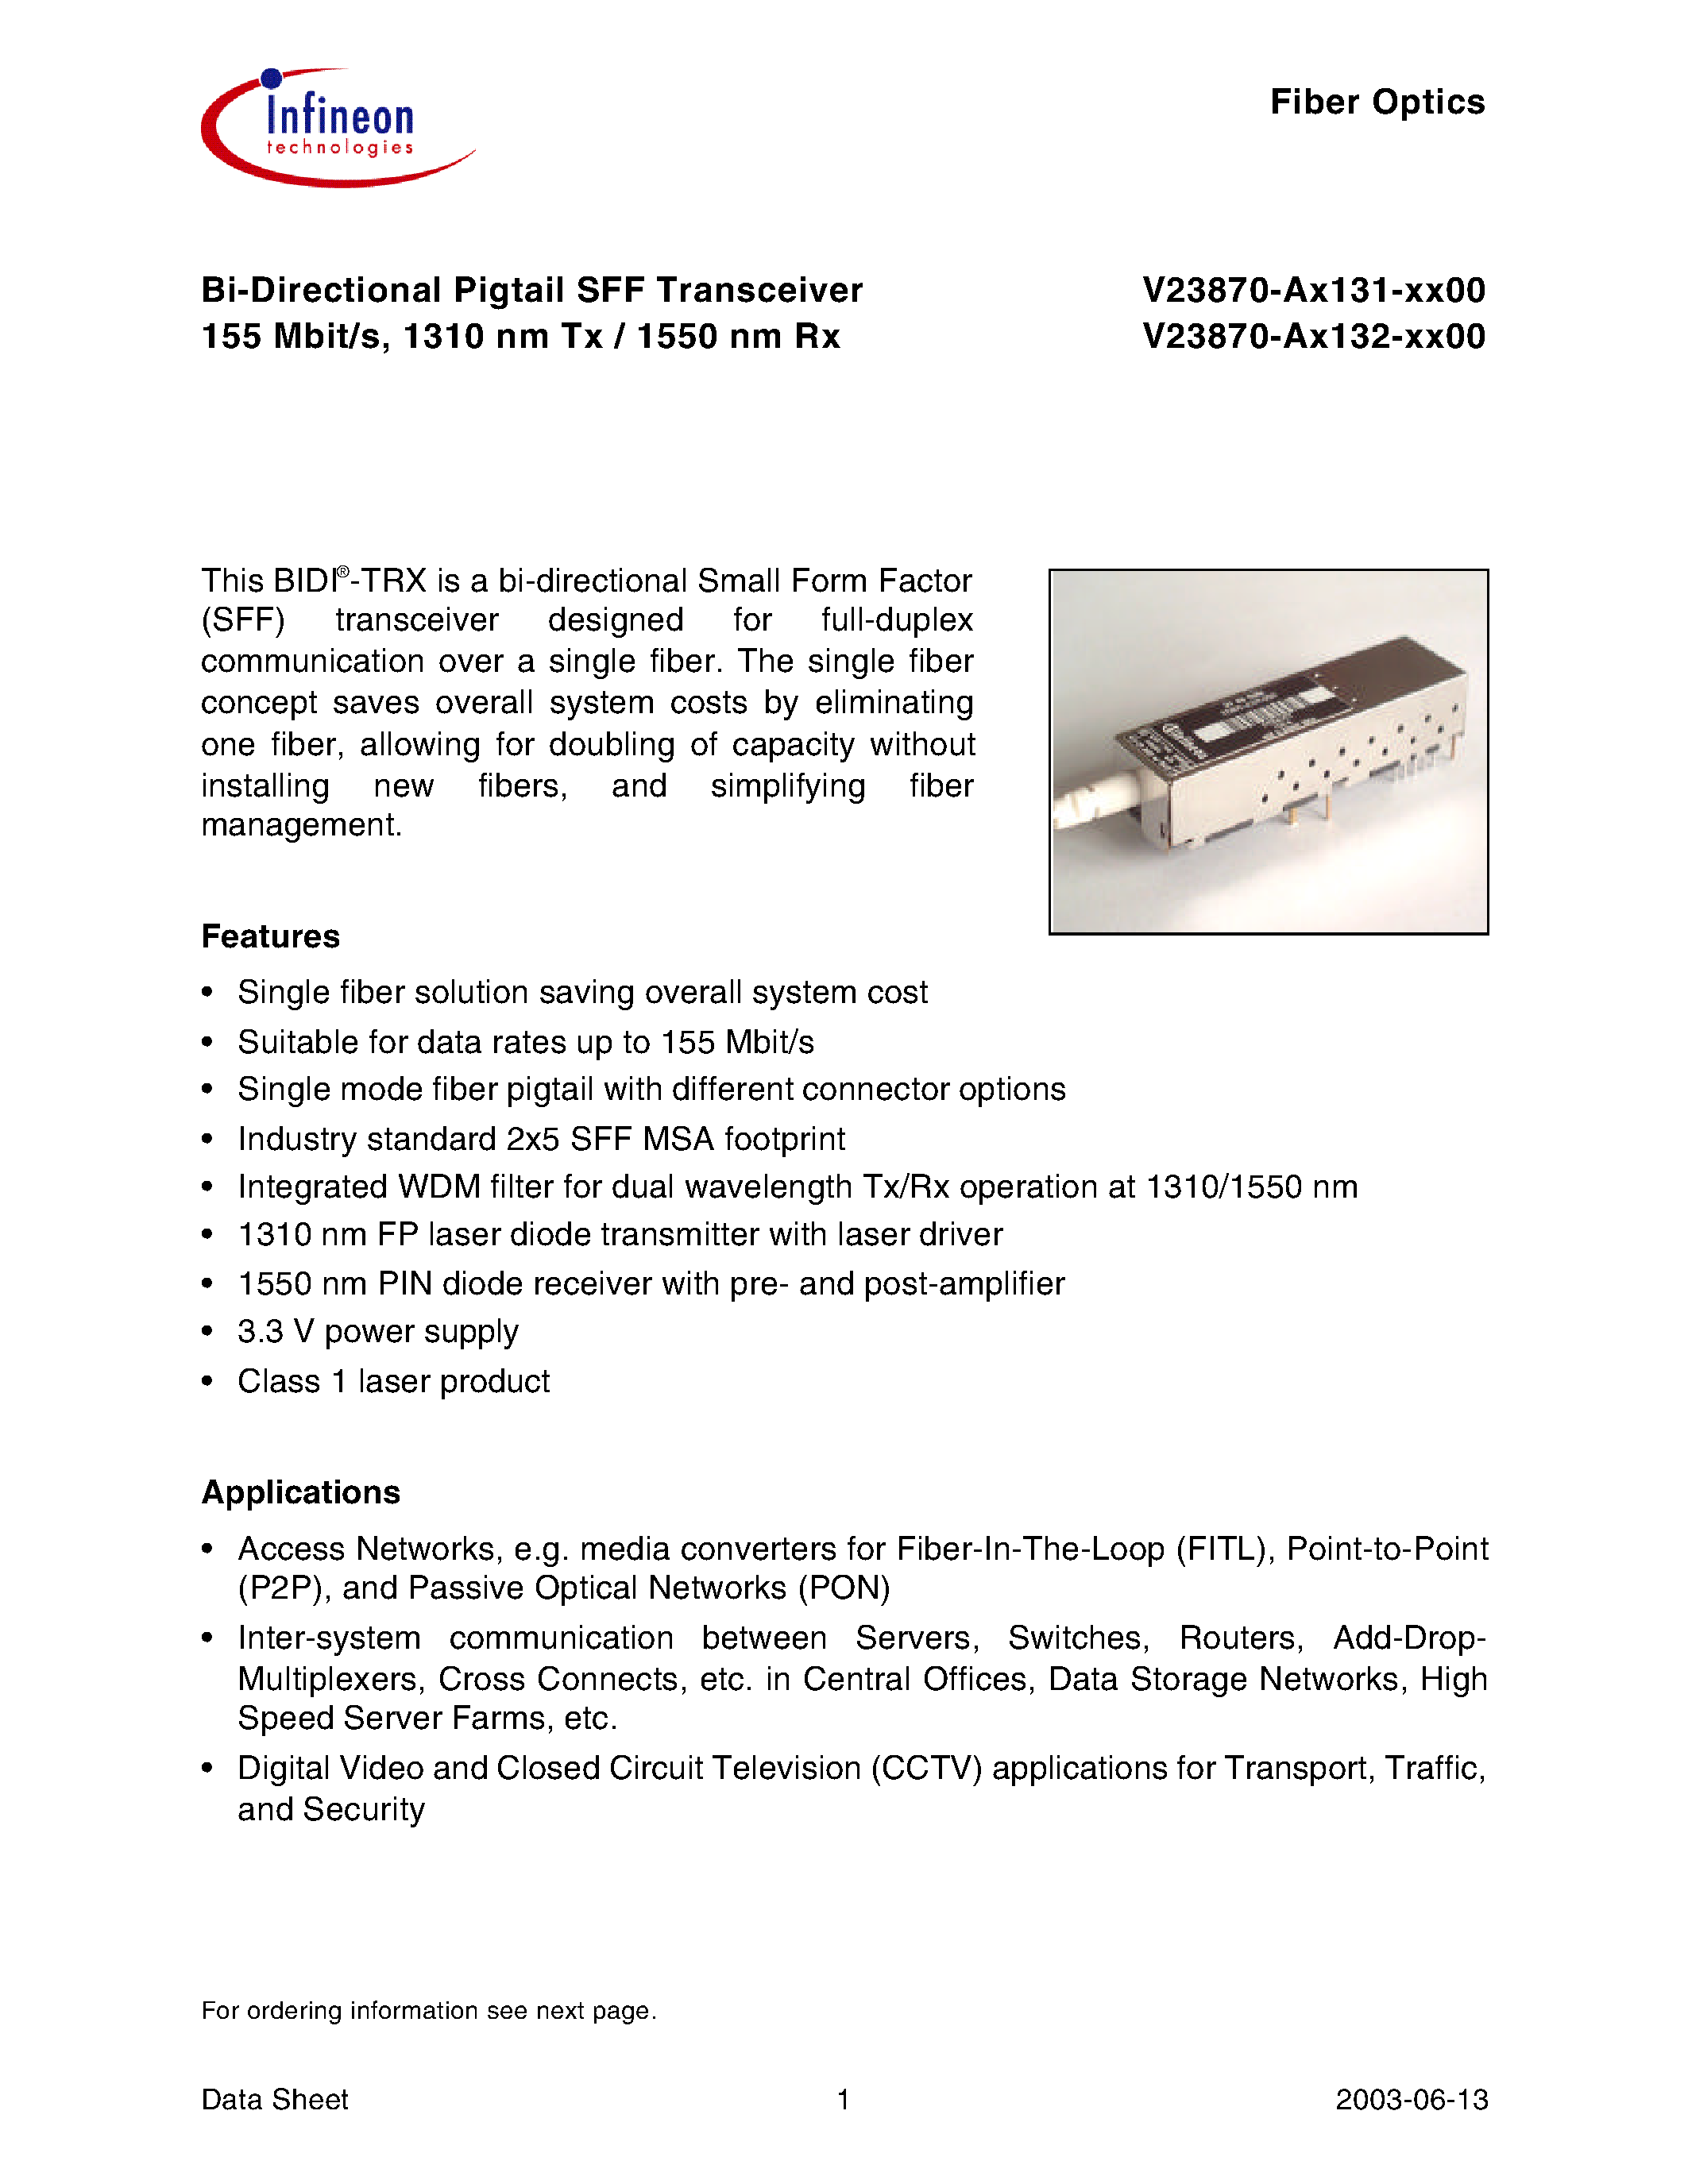 Datasheet V23870-A1131-F100 - Bi-Directional Pigtail SFF Transceiver 155 Mbit/s/ 1310 nm Tx / 1550 nm Rx page 1